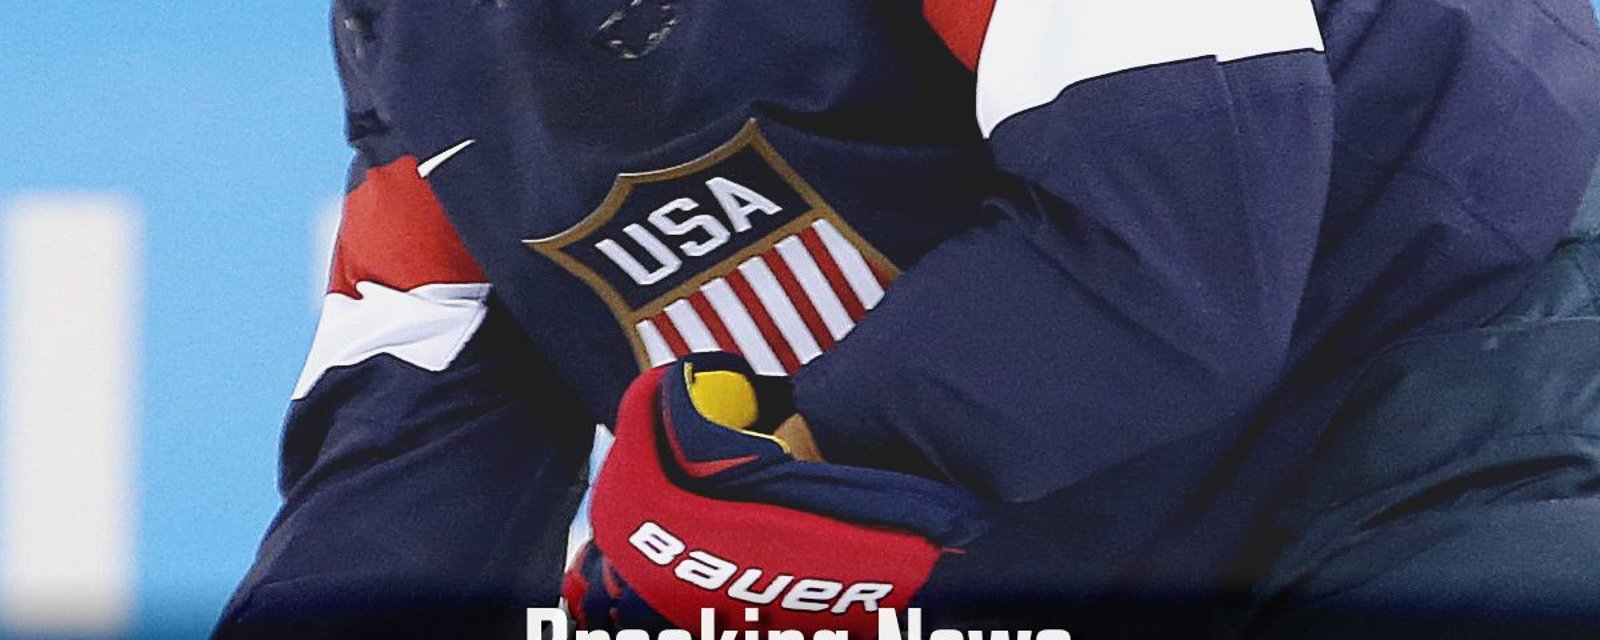 BREAKING: Team USA's World Championship roster just got a huge boost on Defense!